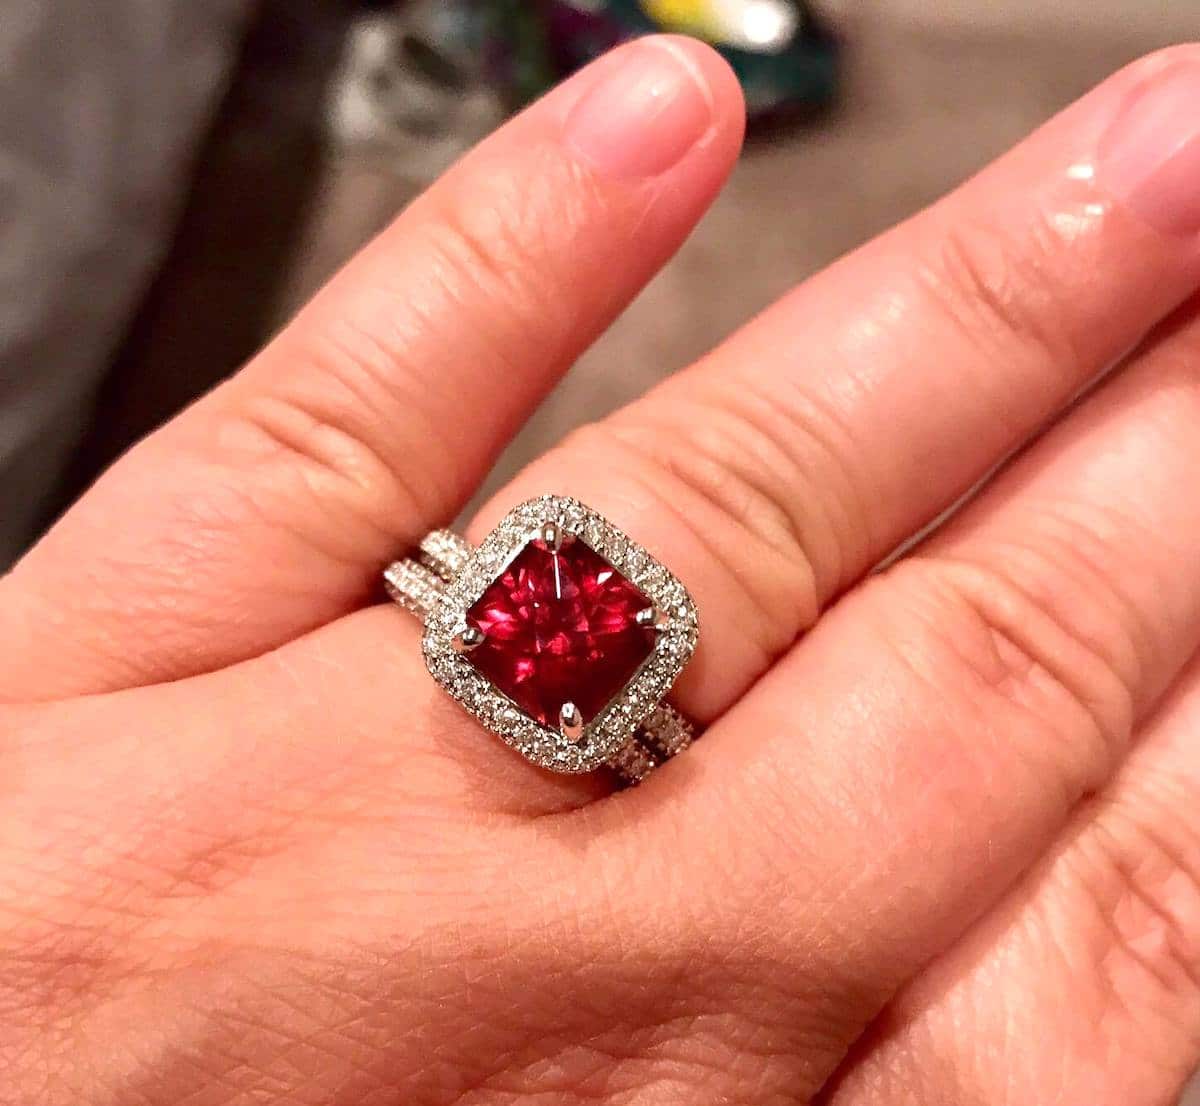 A photo from a customer review featuring a garnet set in a ring not made by Earth's Treasury